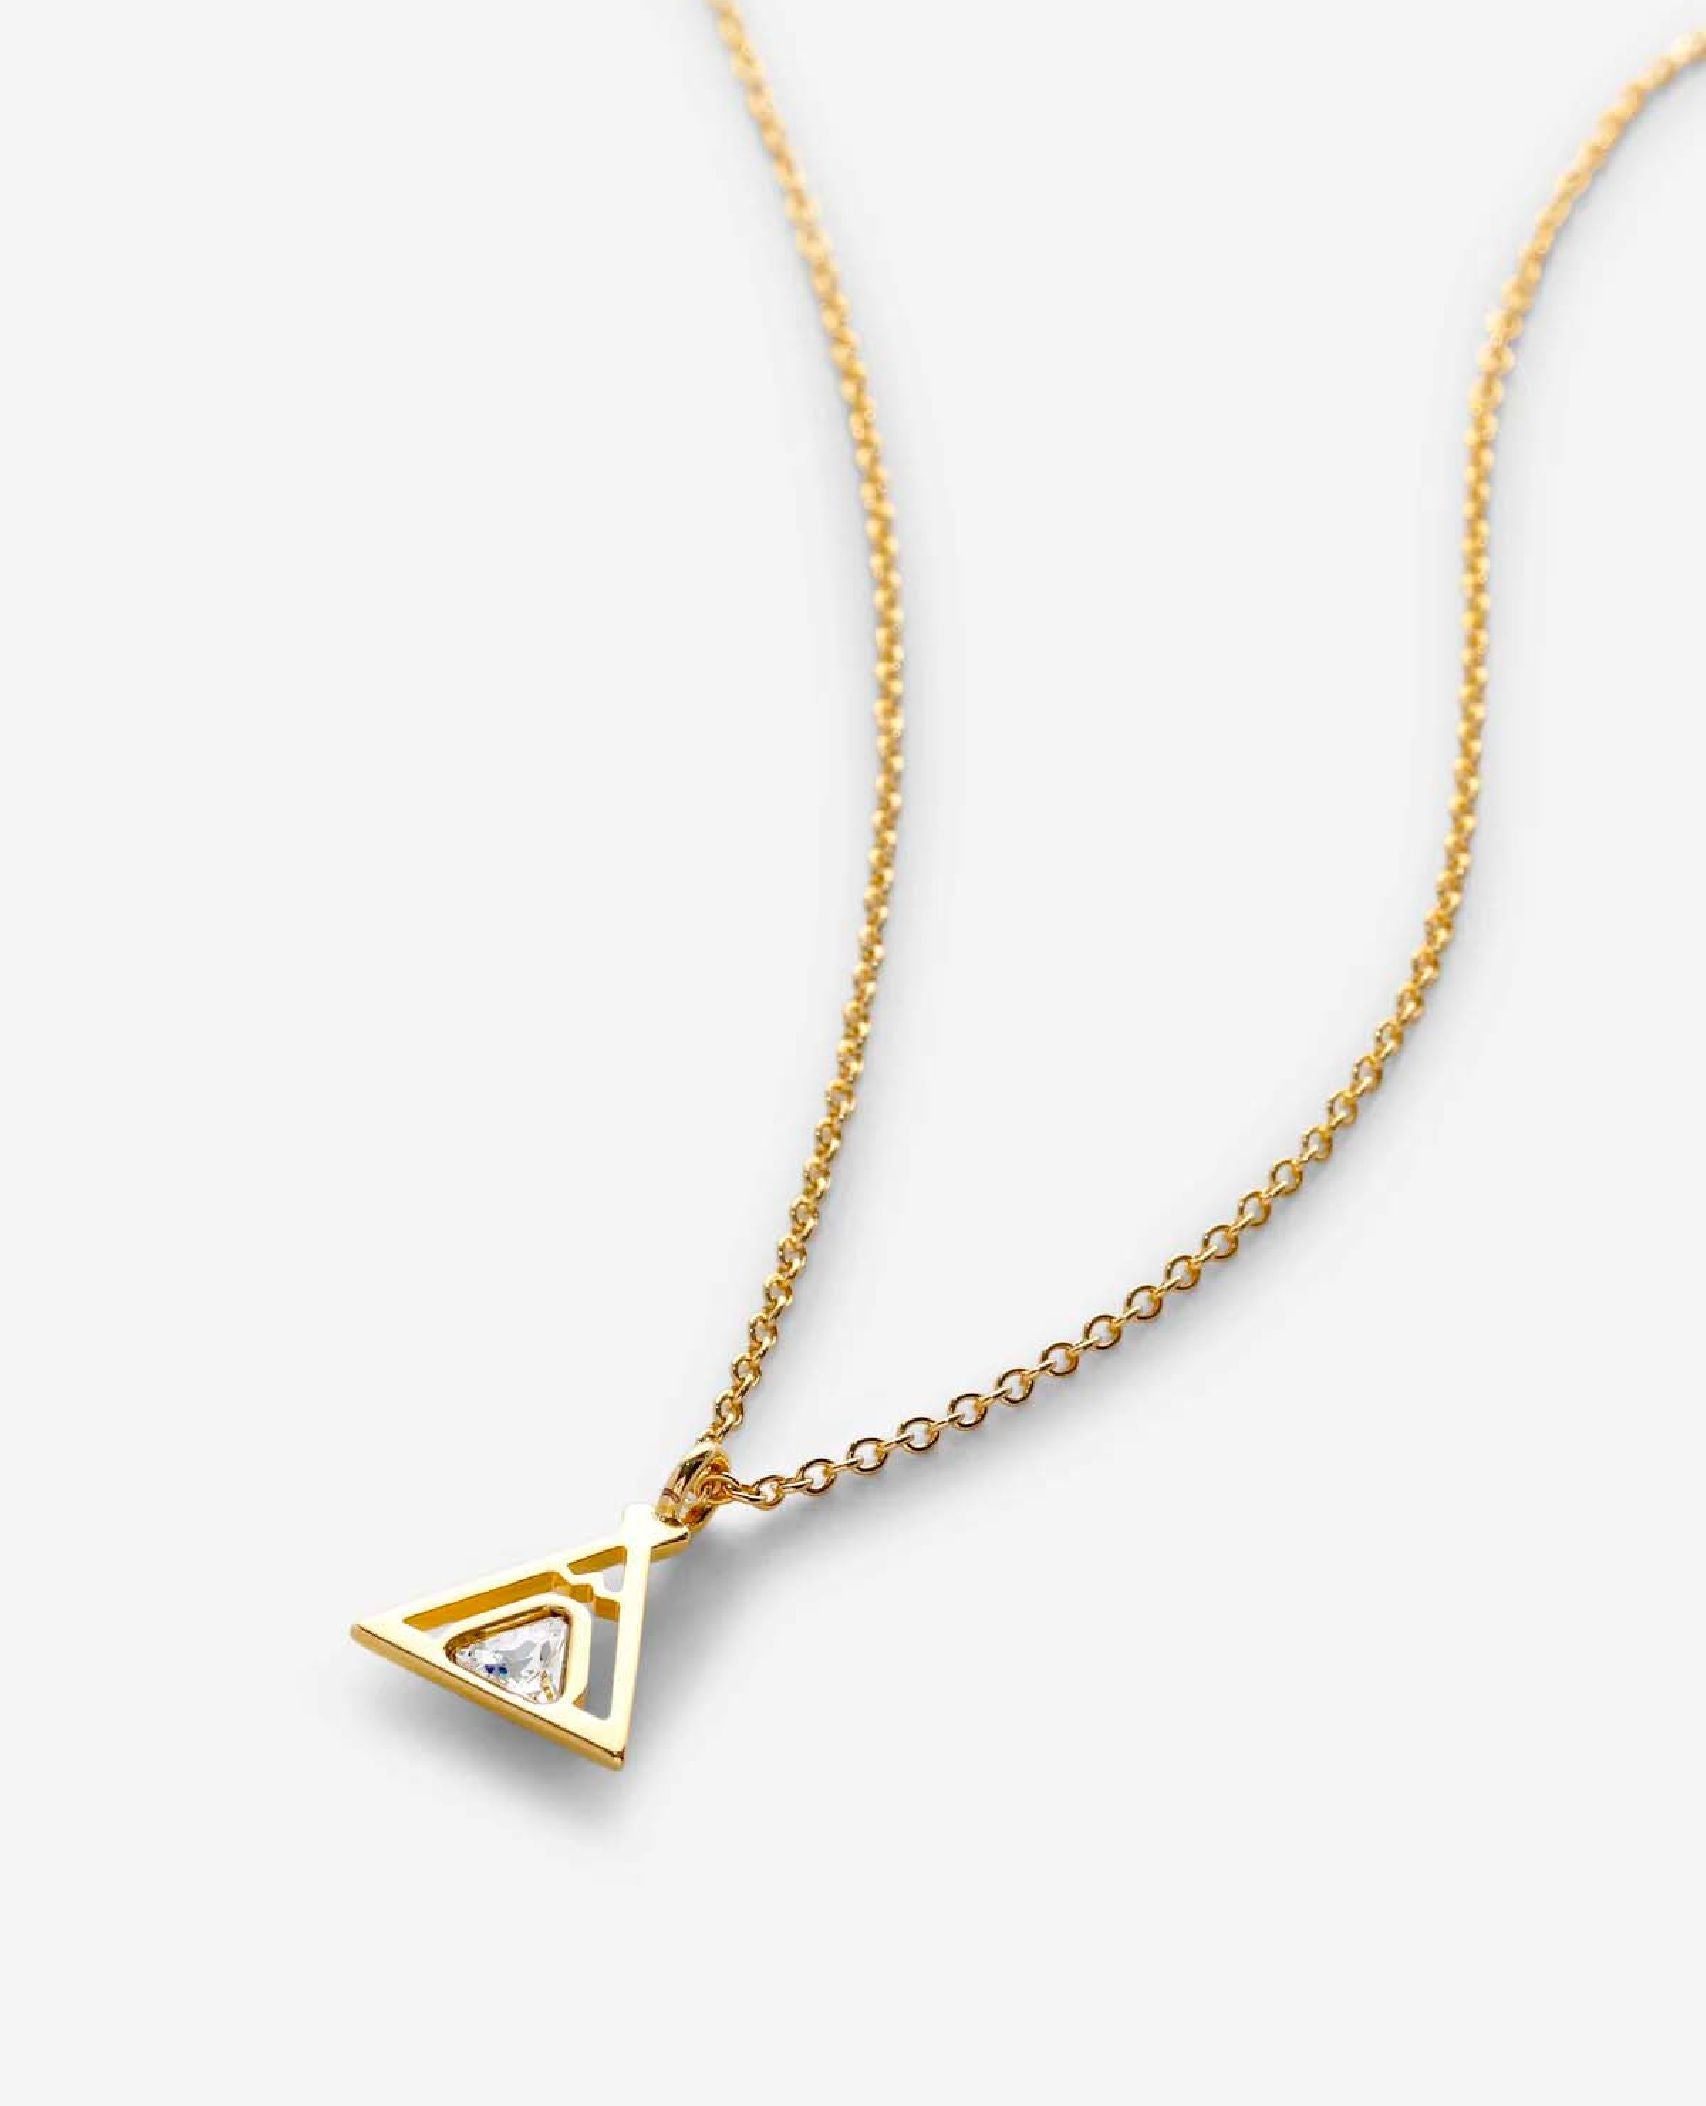 Restock of Tribe Friendship Necklace Gold